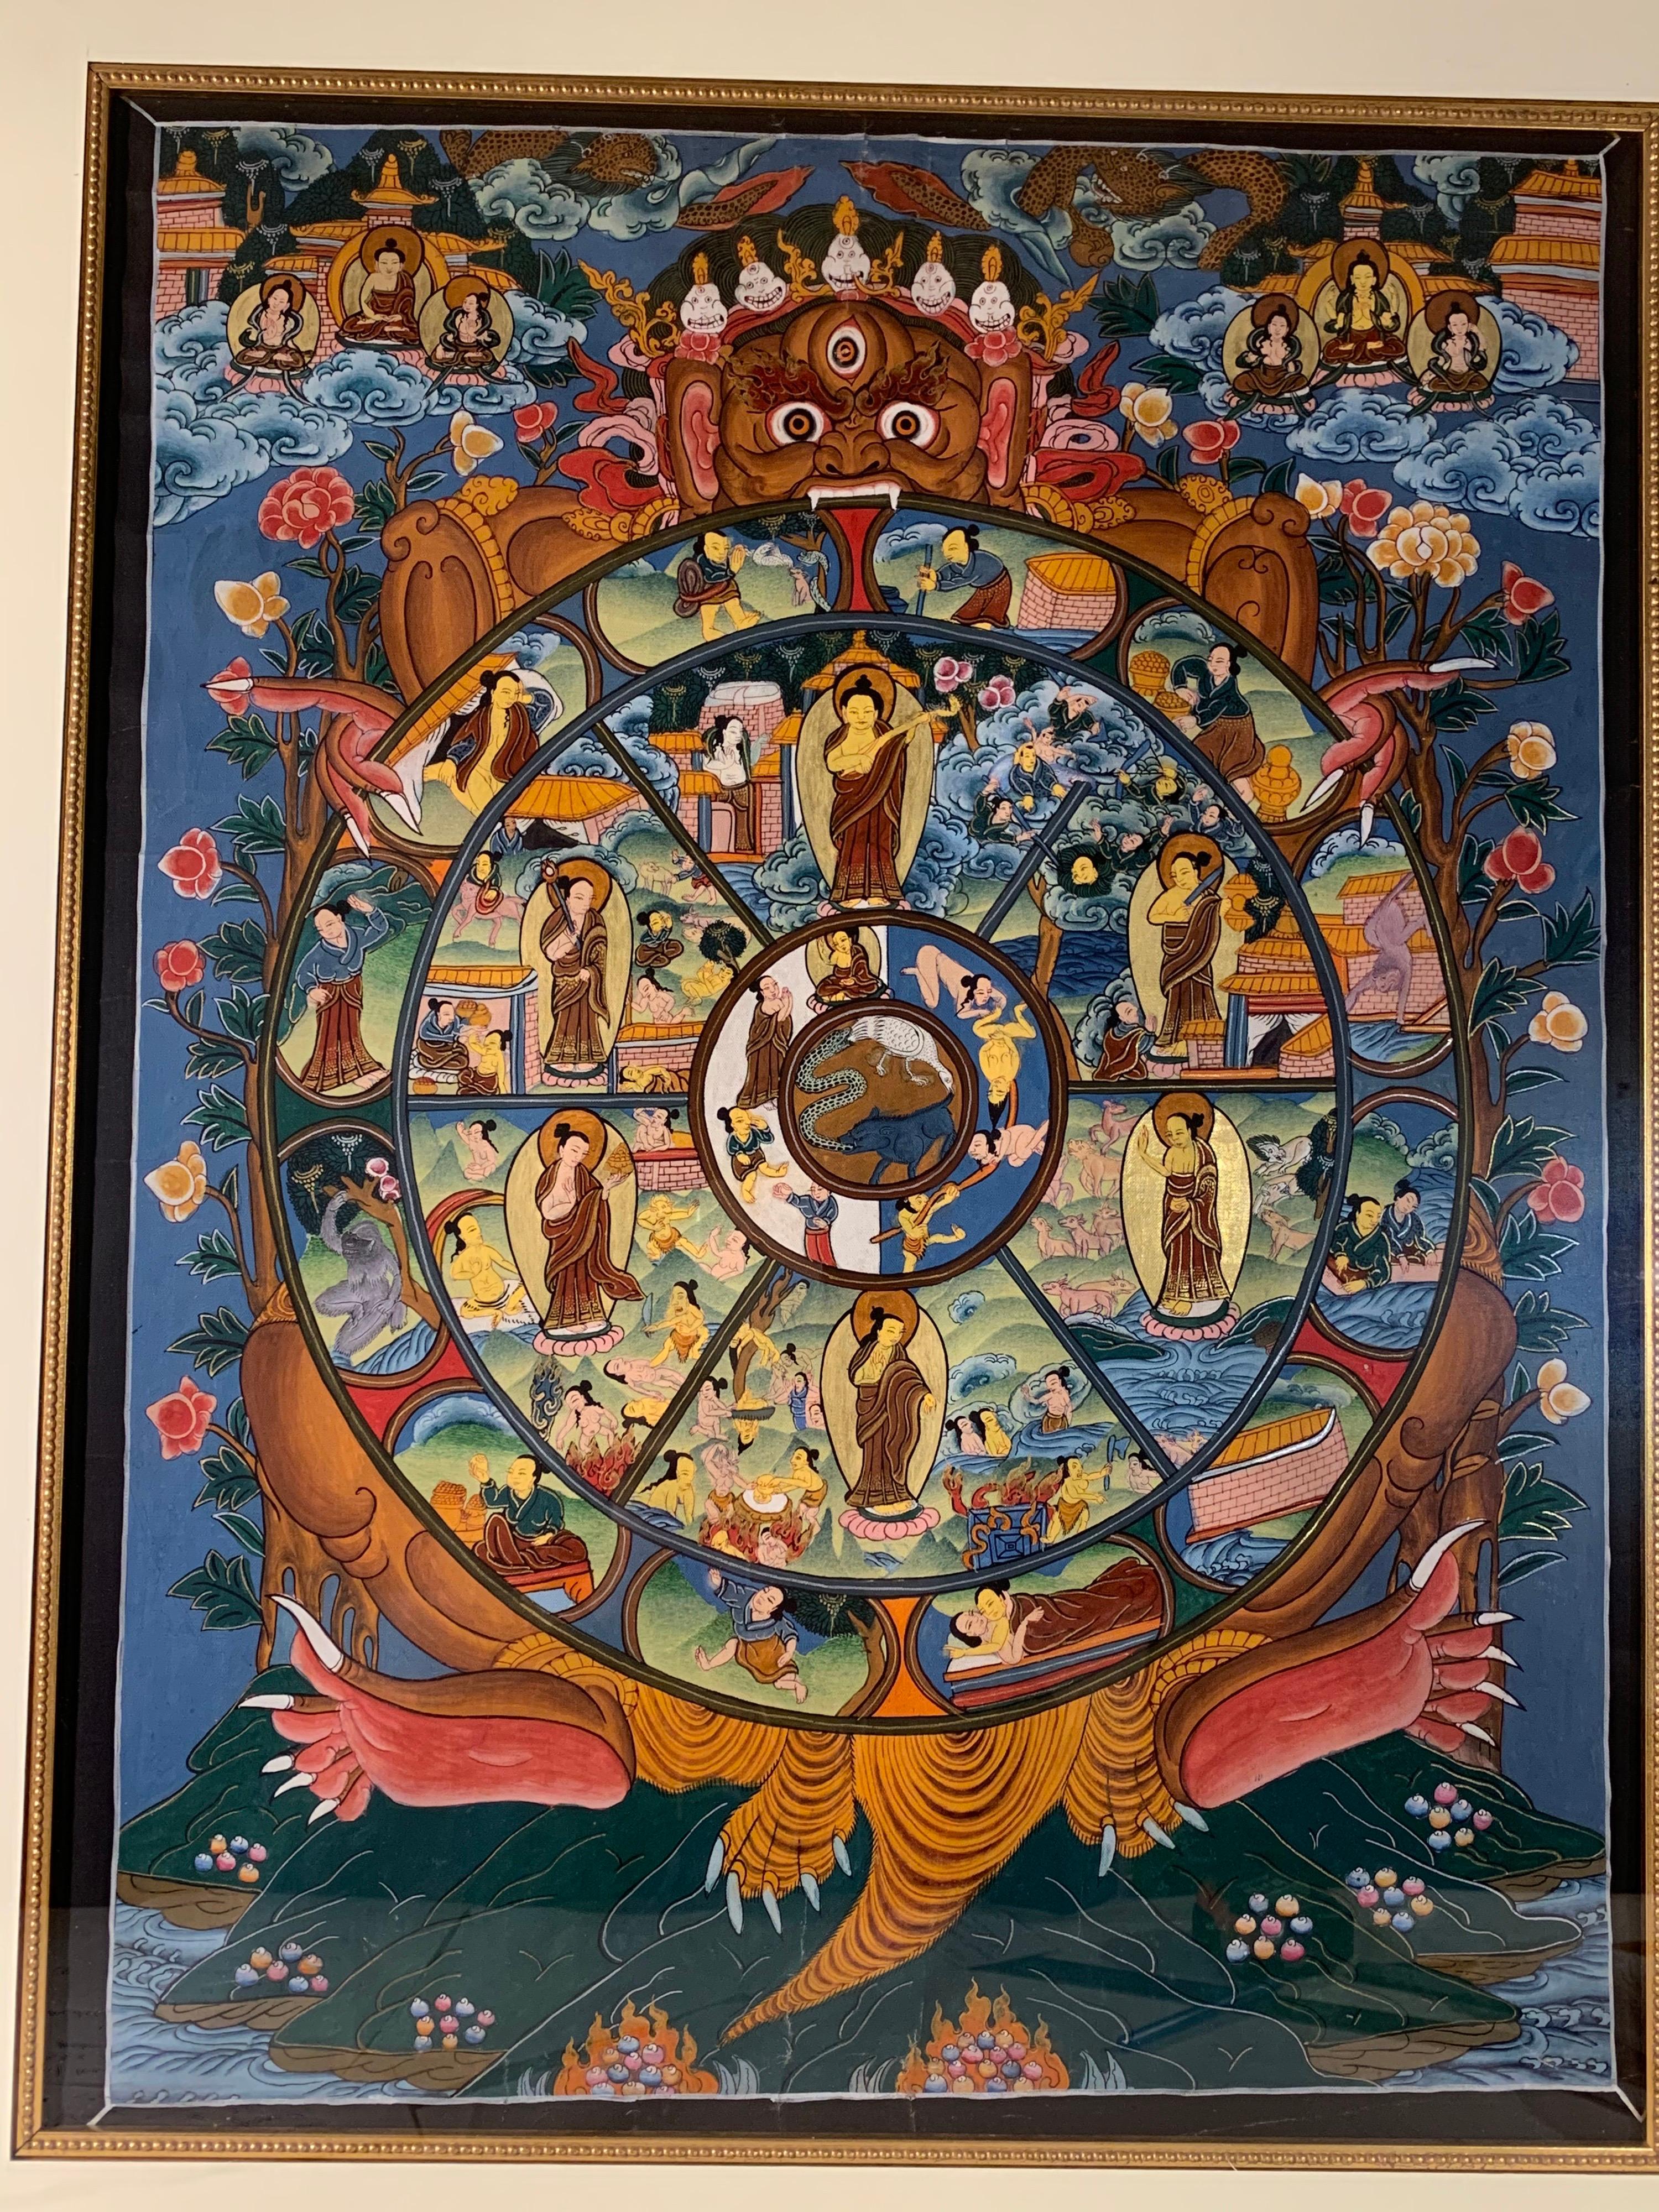 Framed Hand Painted Original Wheel of Life Thangka on Canvas with 24K Gold - Other Art Style Mixed Media Art by Unknown